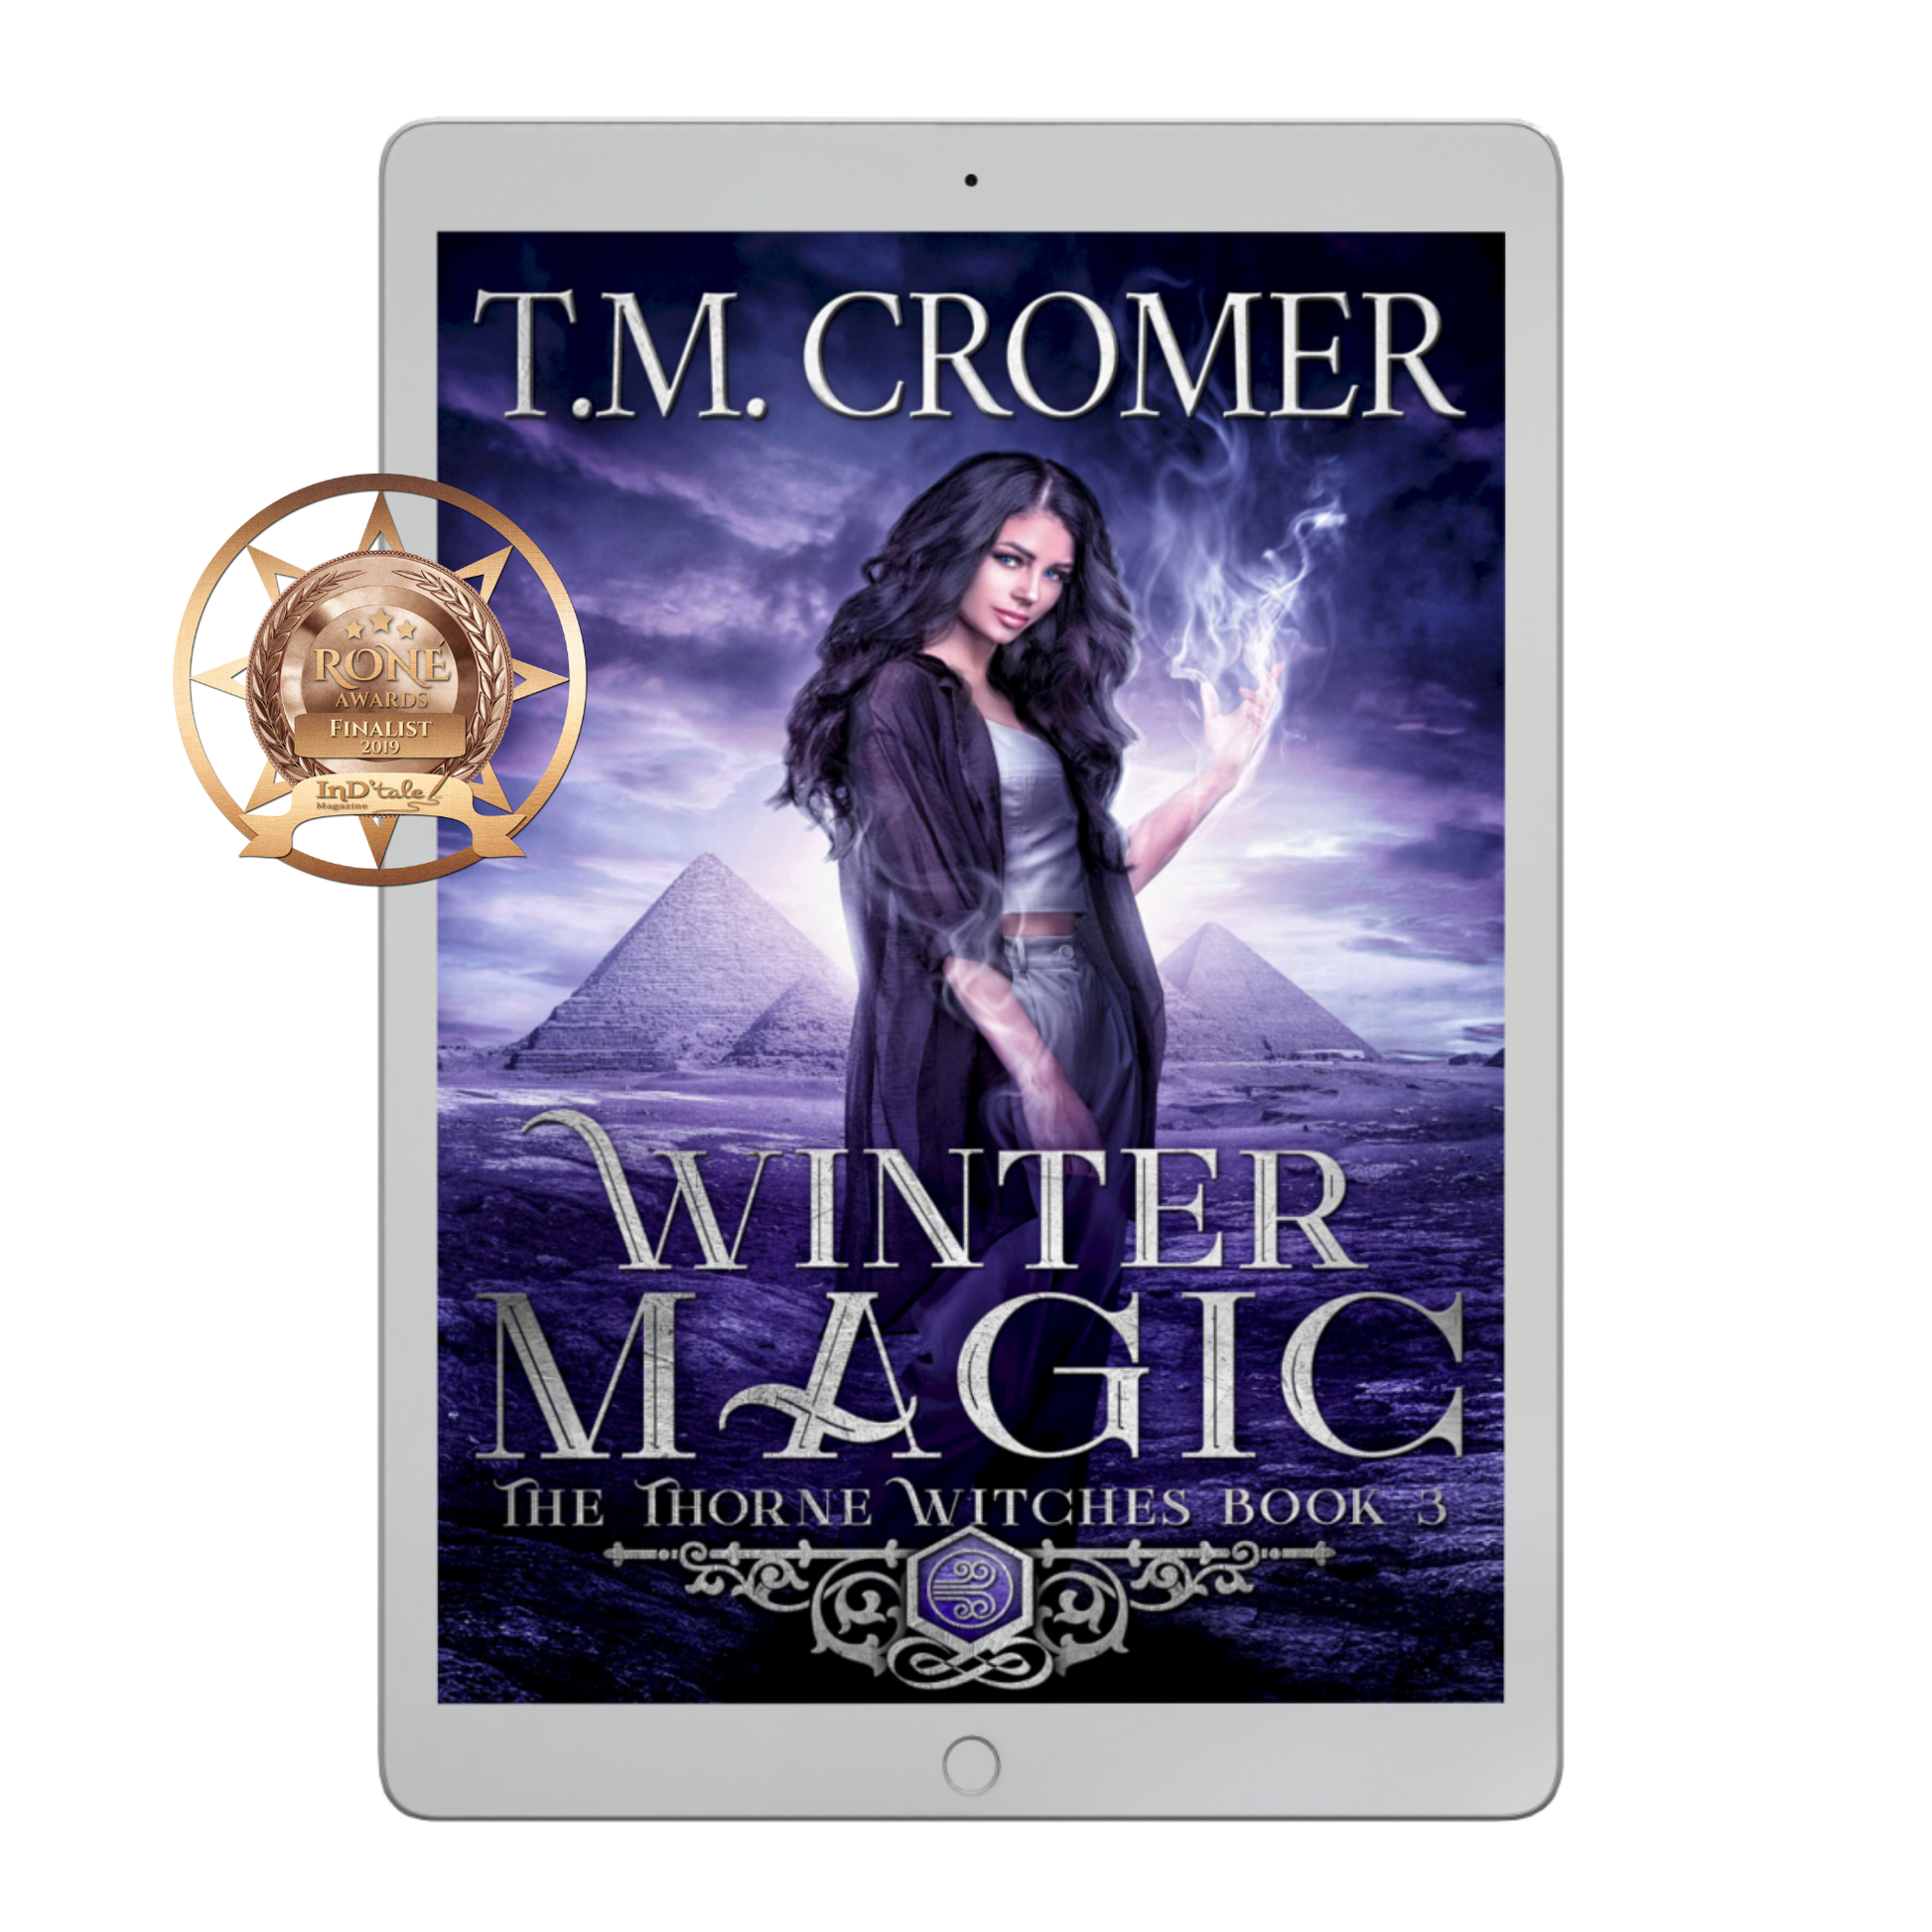 Winter Magic Ebook The Thorne Witches #3 Paranormal Romance, Urban Fantasy, Magical Realism